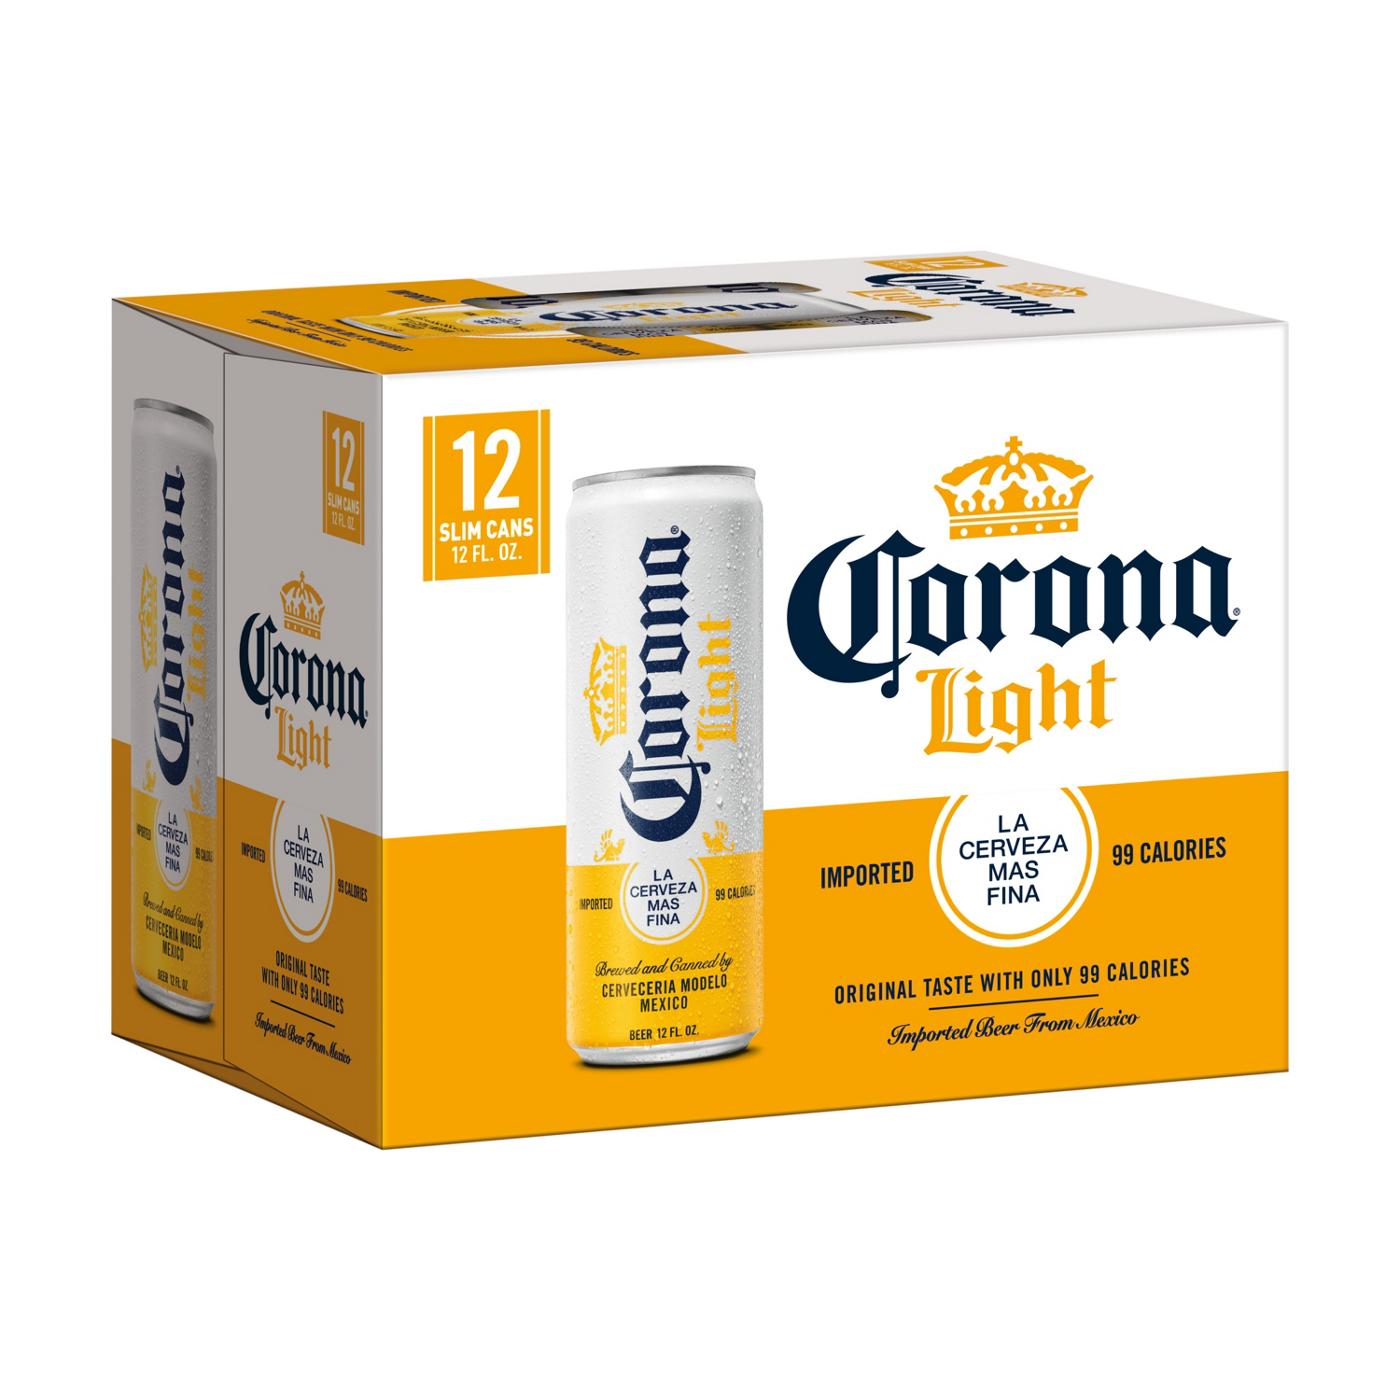 Corona Light Mexican Lager Import Light Beer 12 oz Cans, 12 pk; image 1 of 10